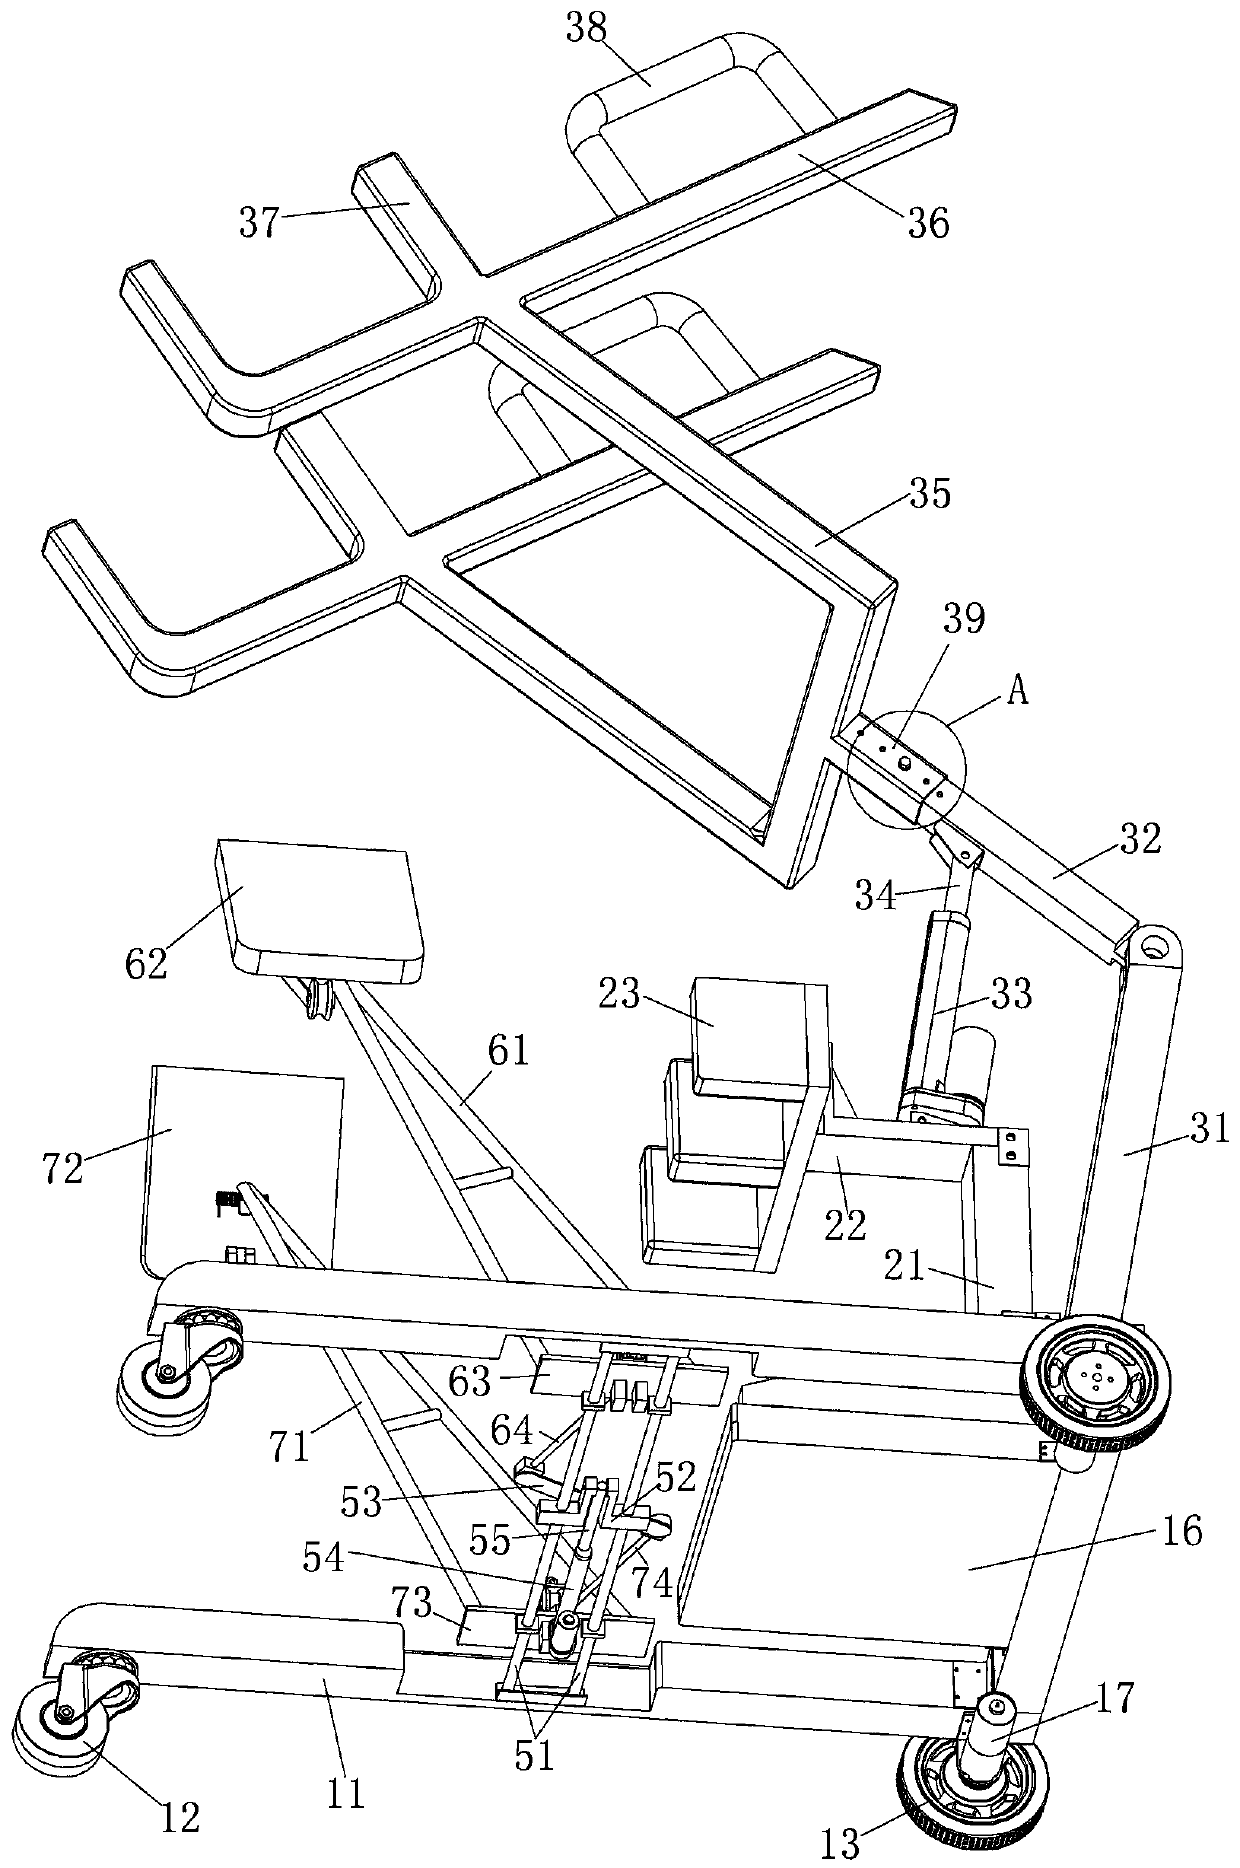 Standing assisting wagon with combined type seat plate